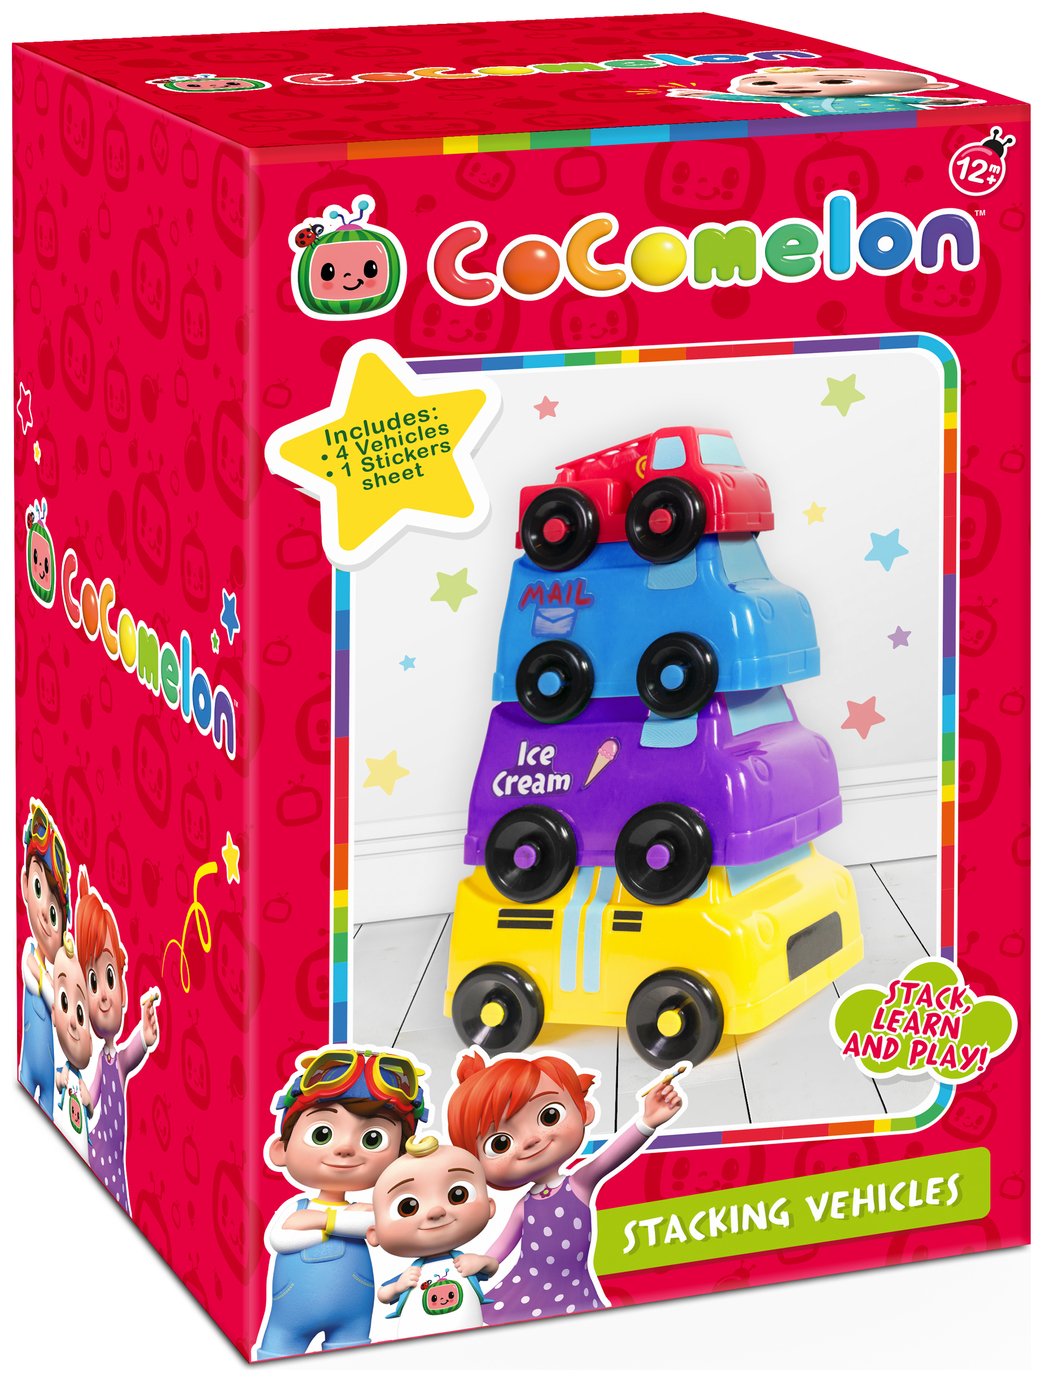 Cocomelon Fun Stacking Vehicles